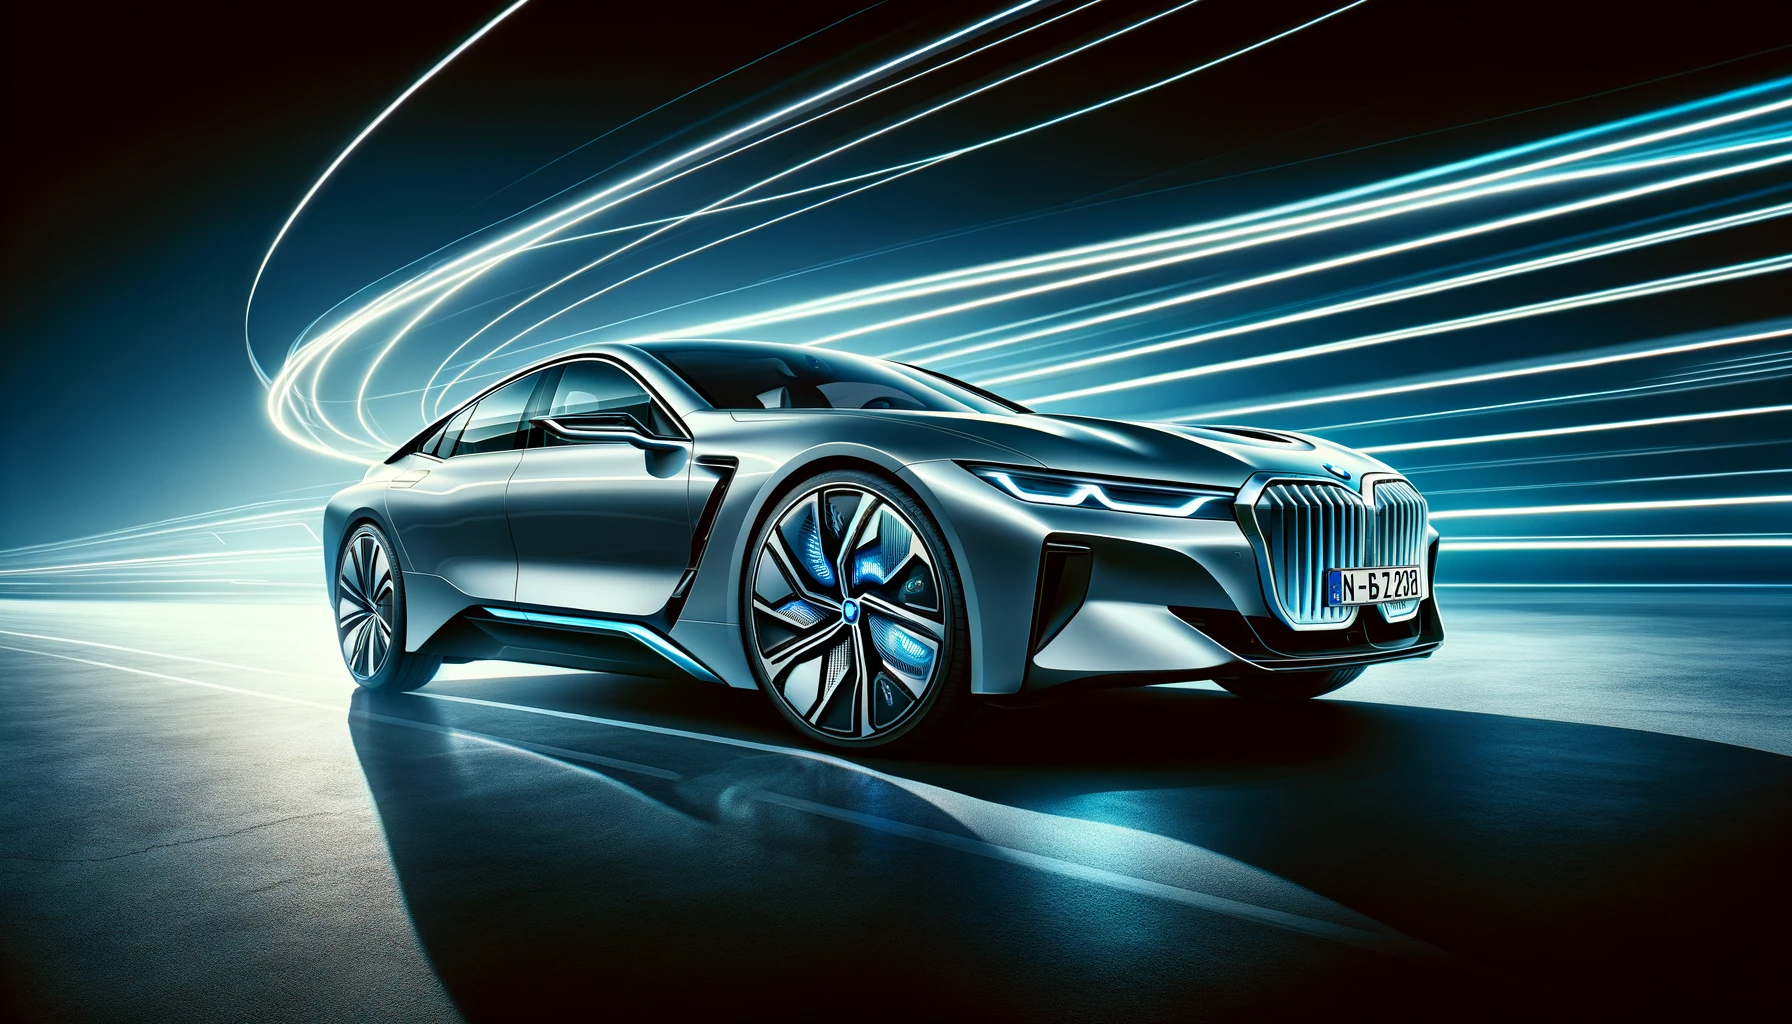 A New Dawn for Luxury: The All-Electric BMW i7